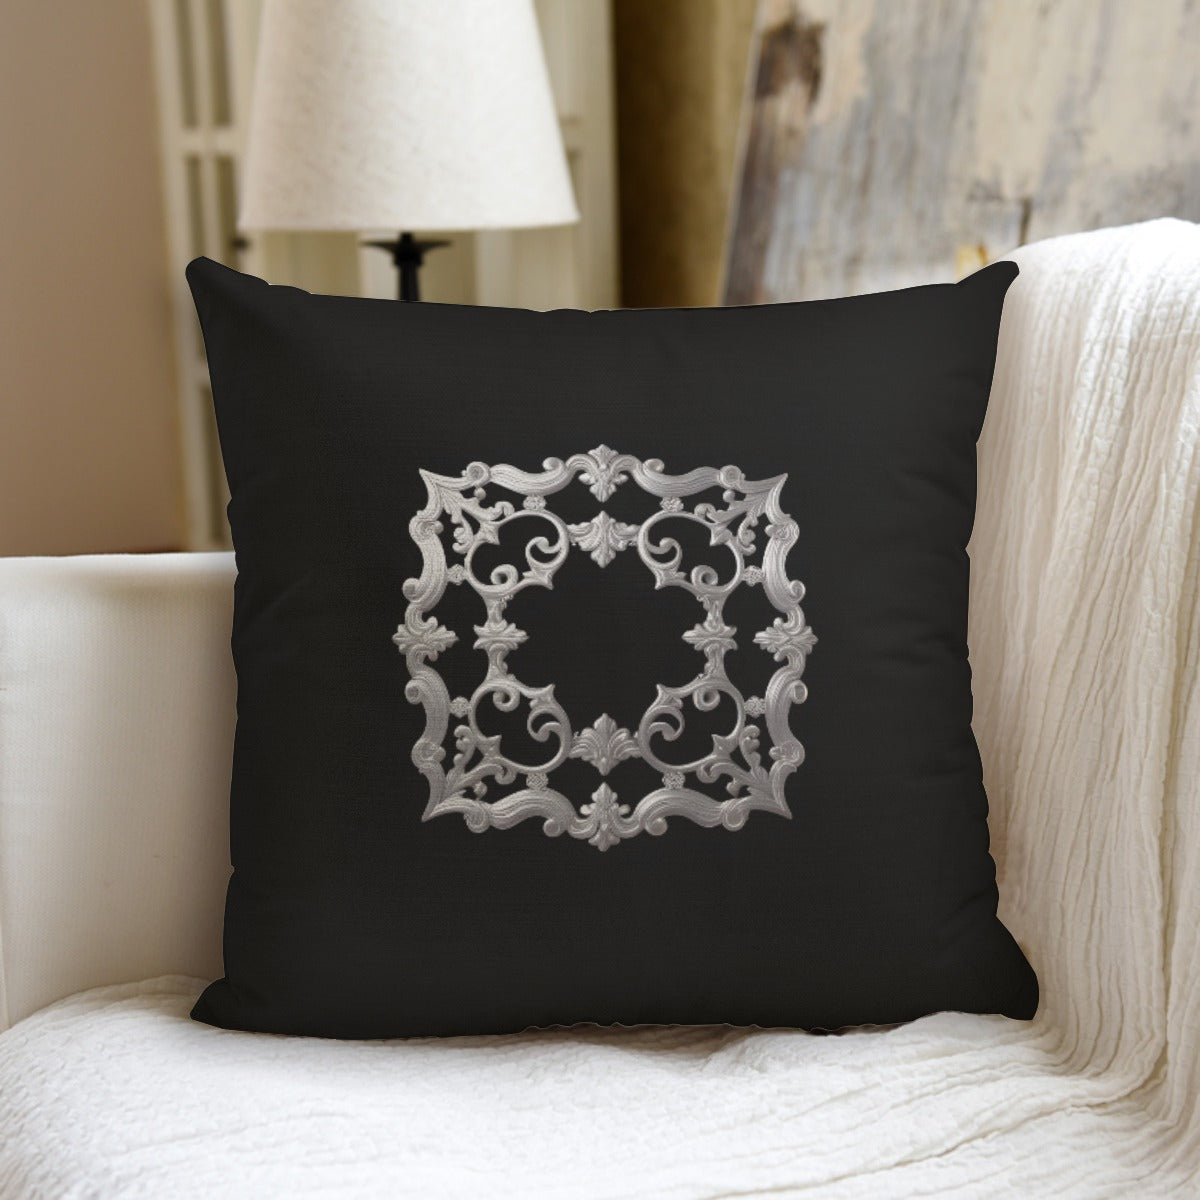 AC BAROQUE All-Over Print couch pillow with pillow Inserts